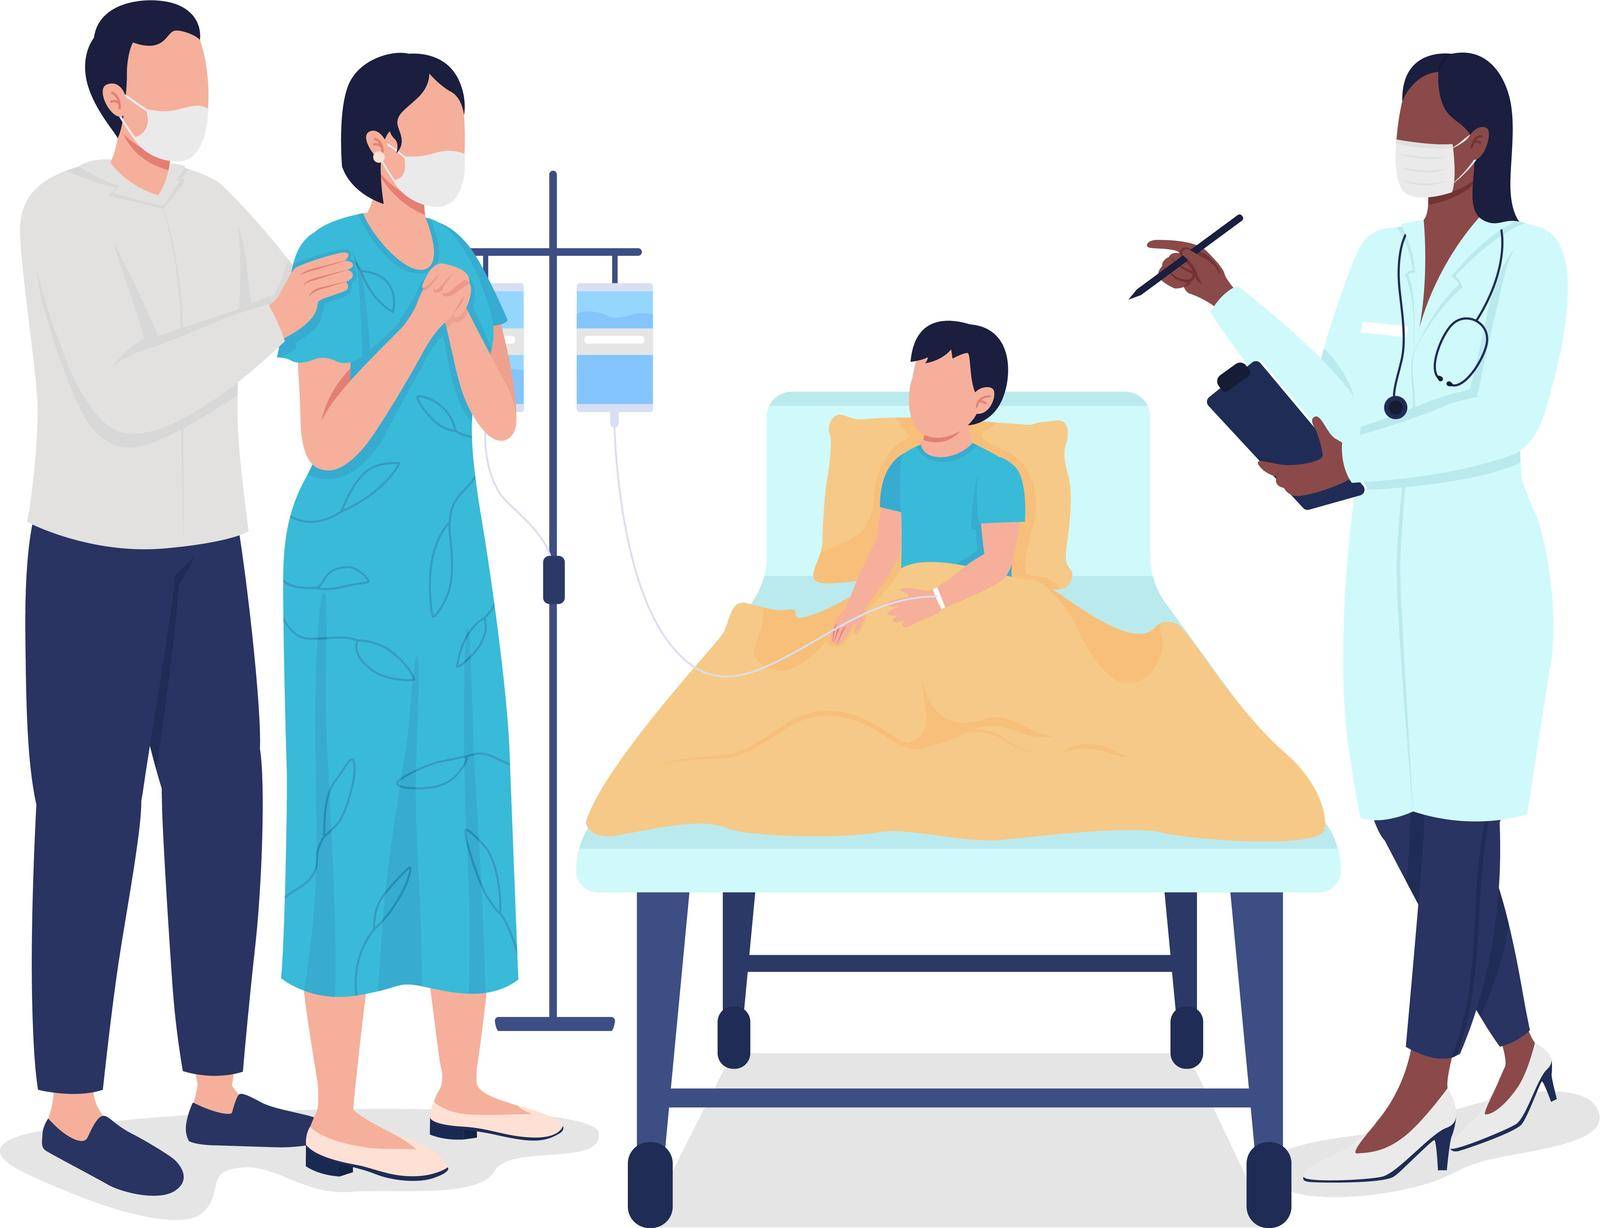 Child hospitalization semi flat color vector characters. Full body people on white. Medical procedures in hospital isolated modern cartoon style illustration for graphic design and animation